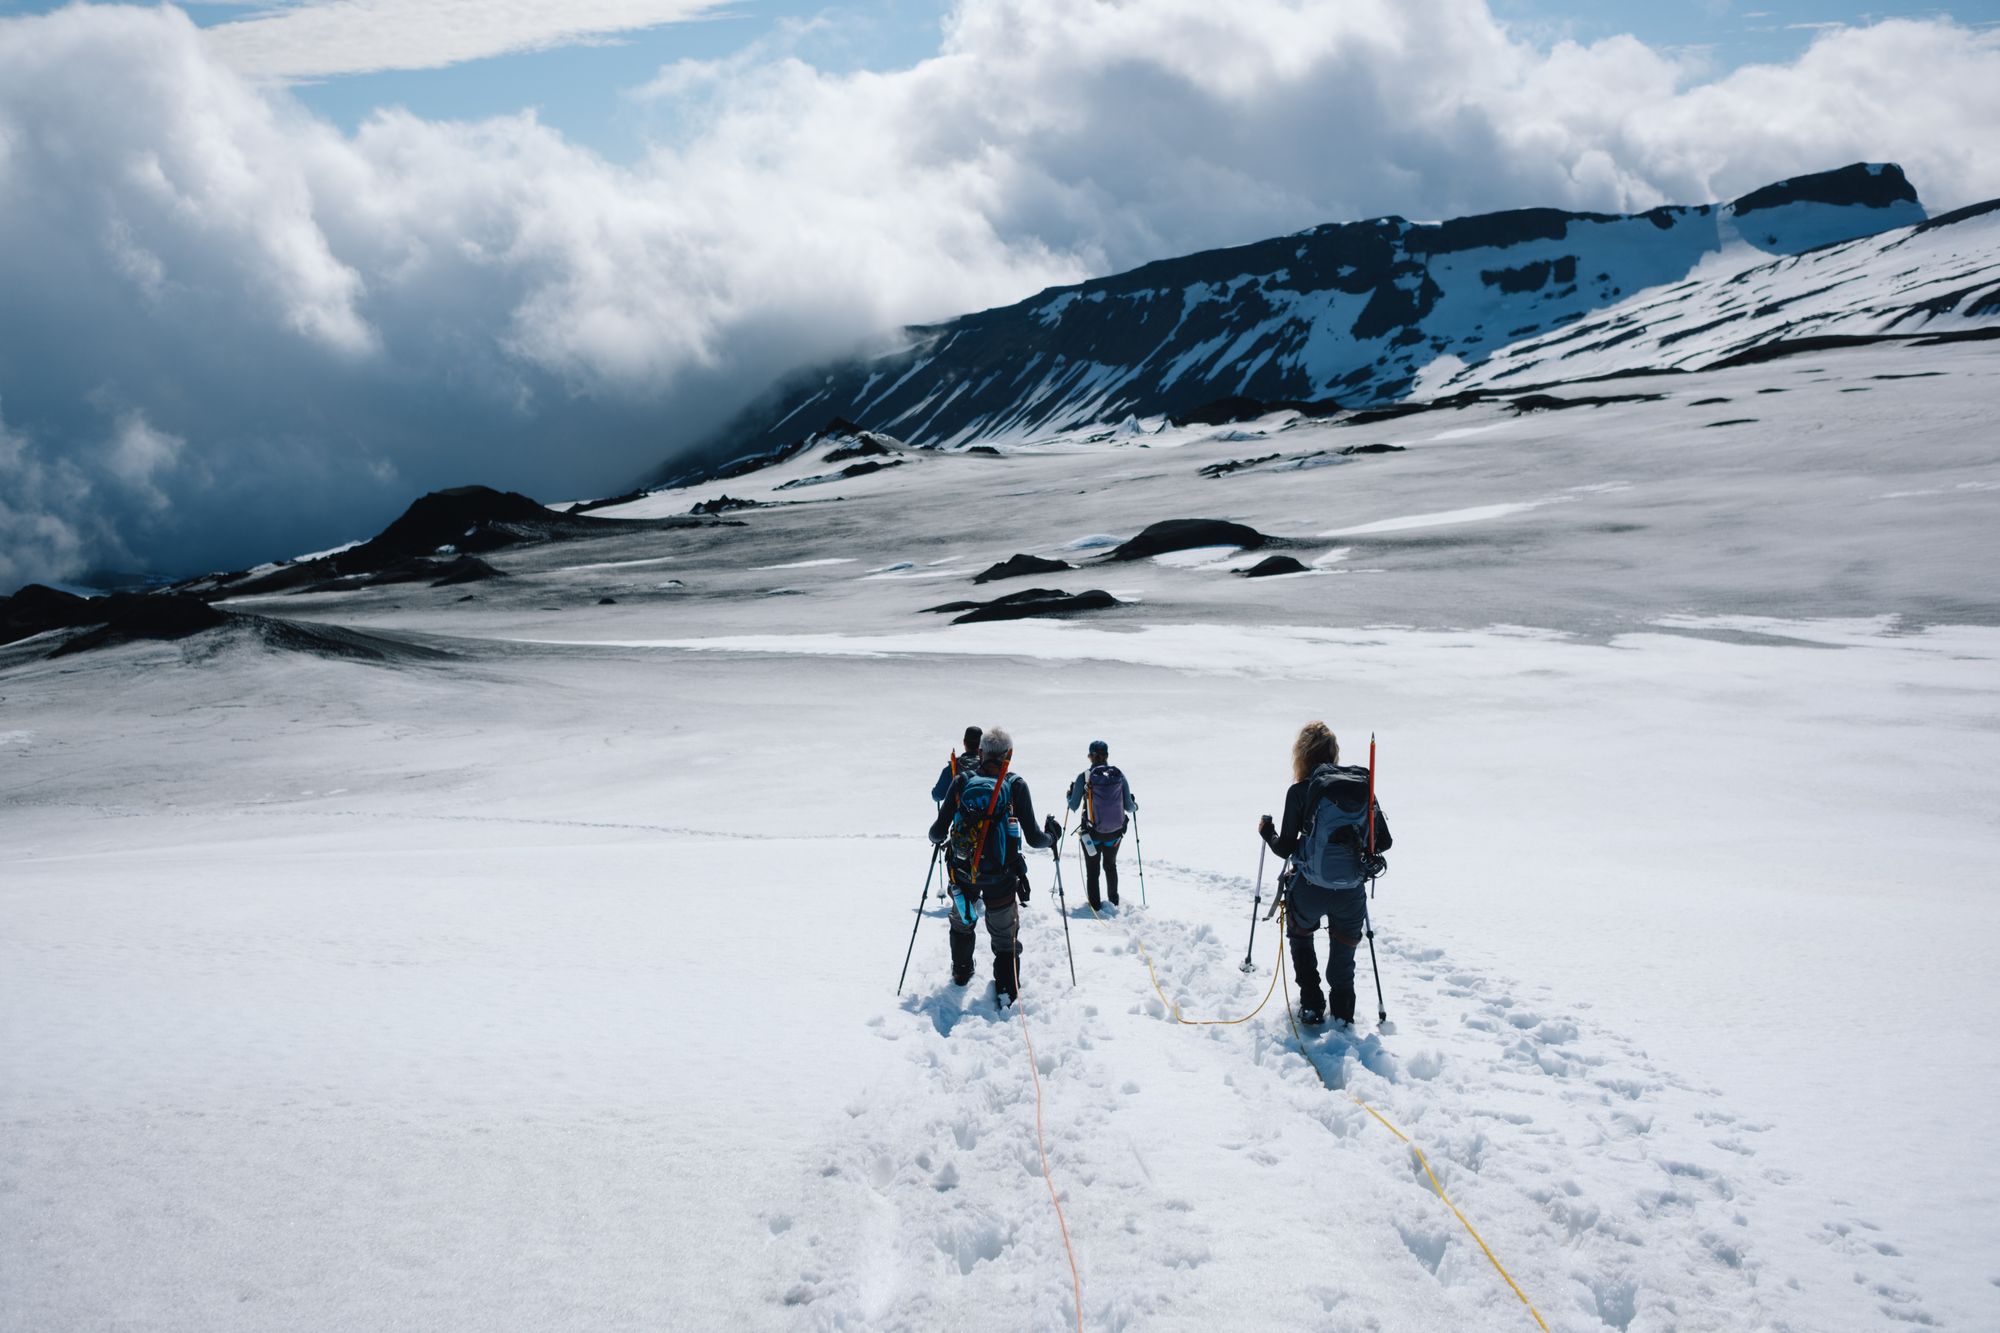 Hikers on a snow-covered mountain in Iceland